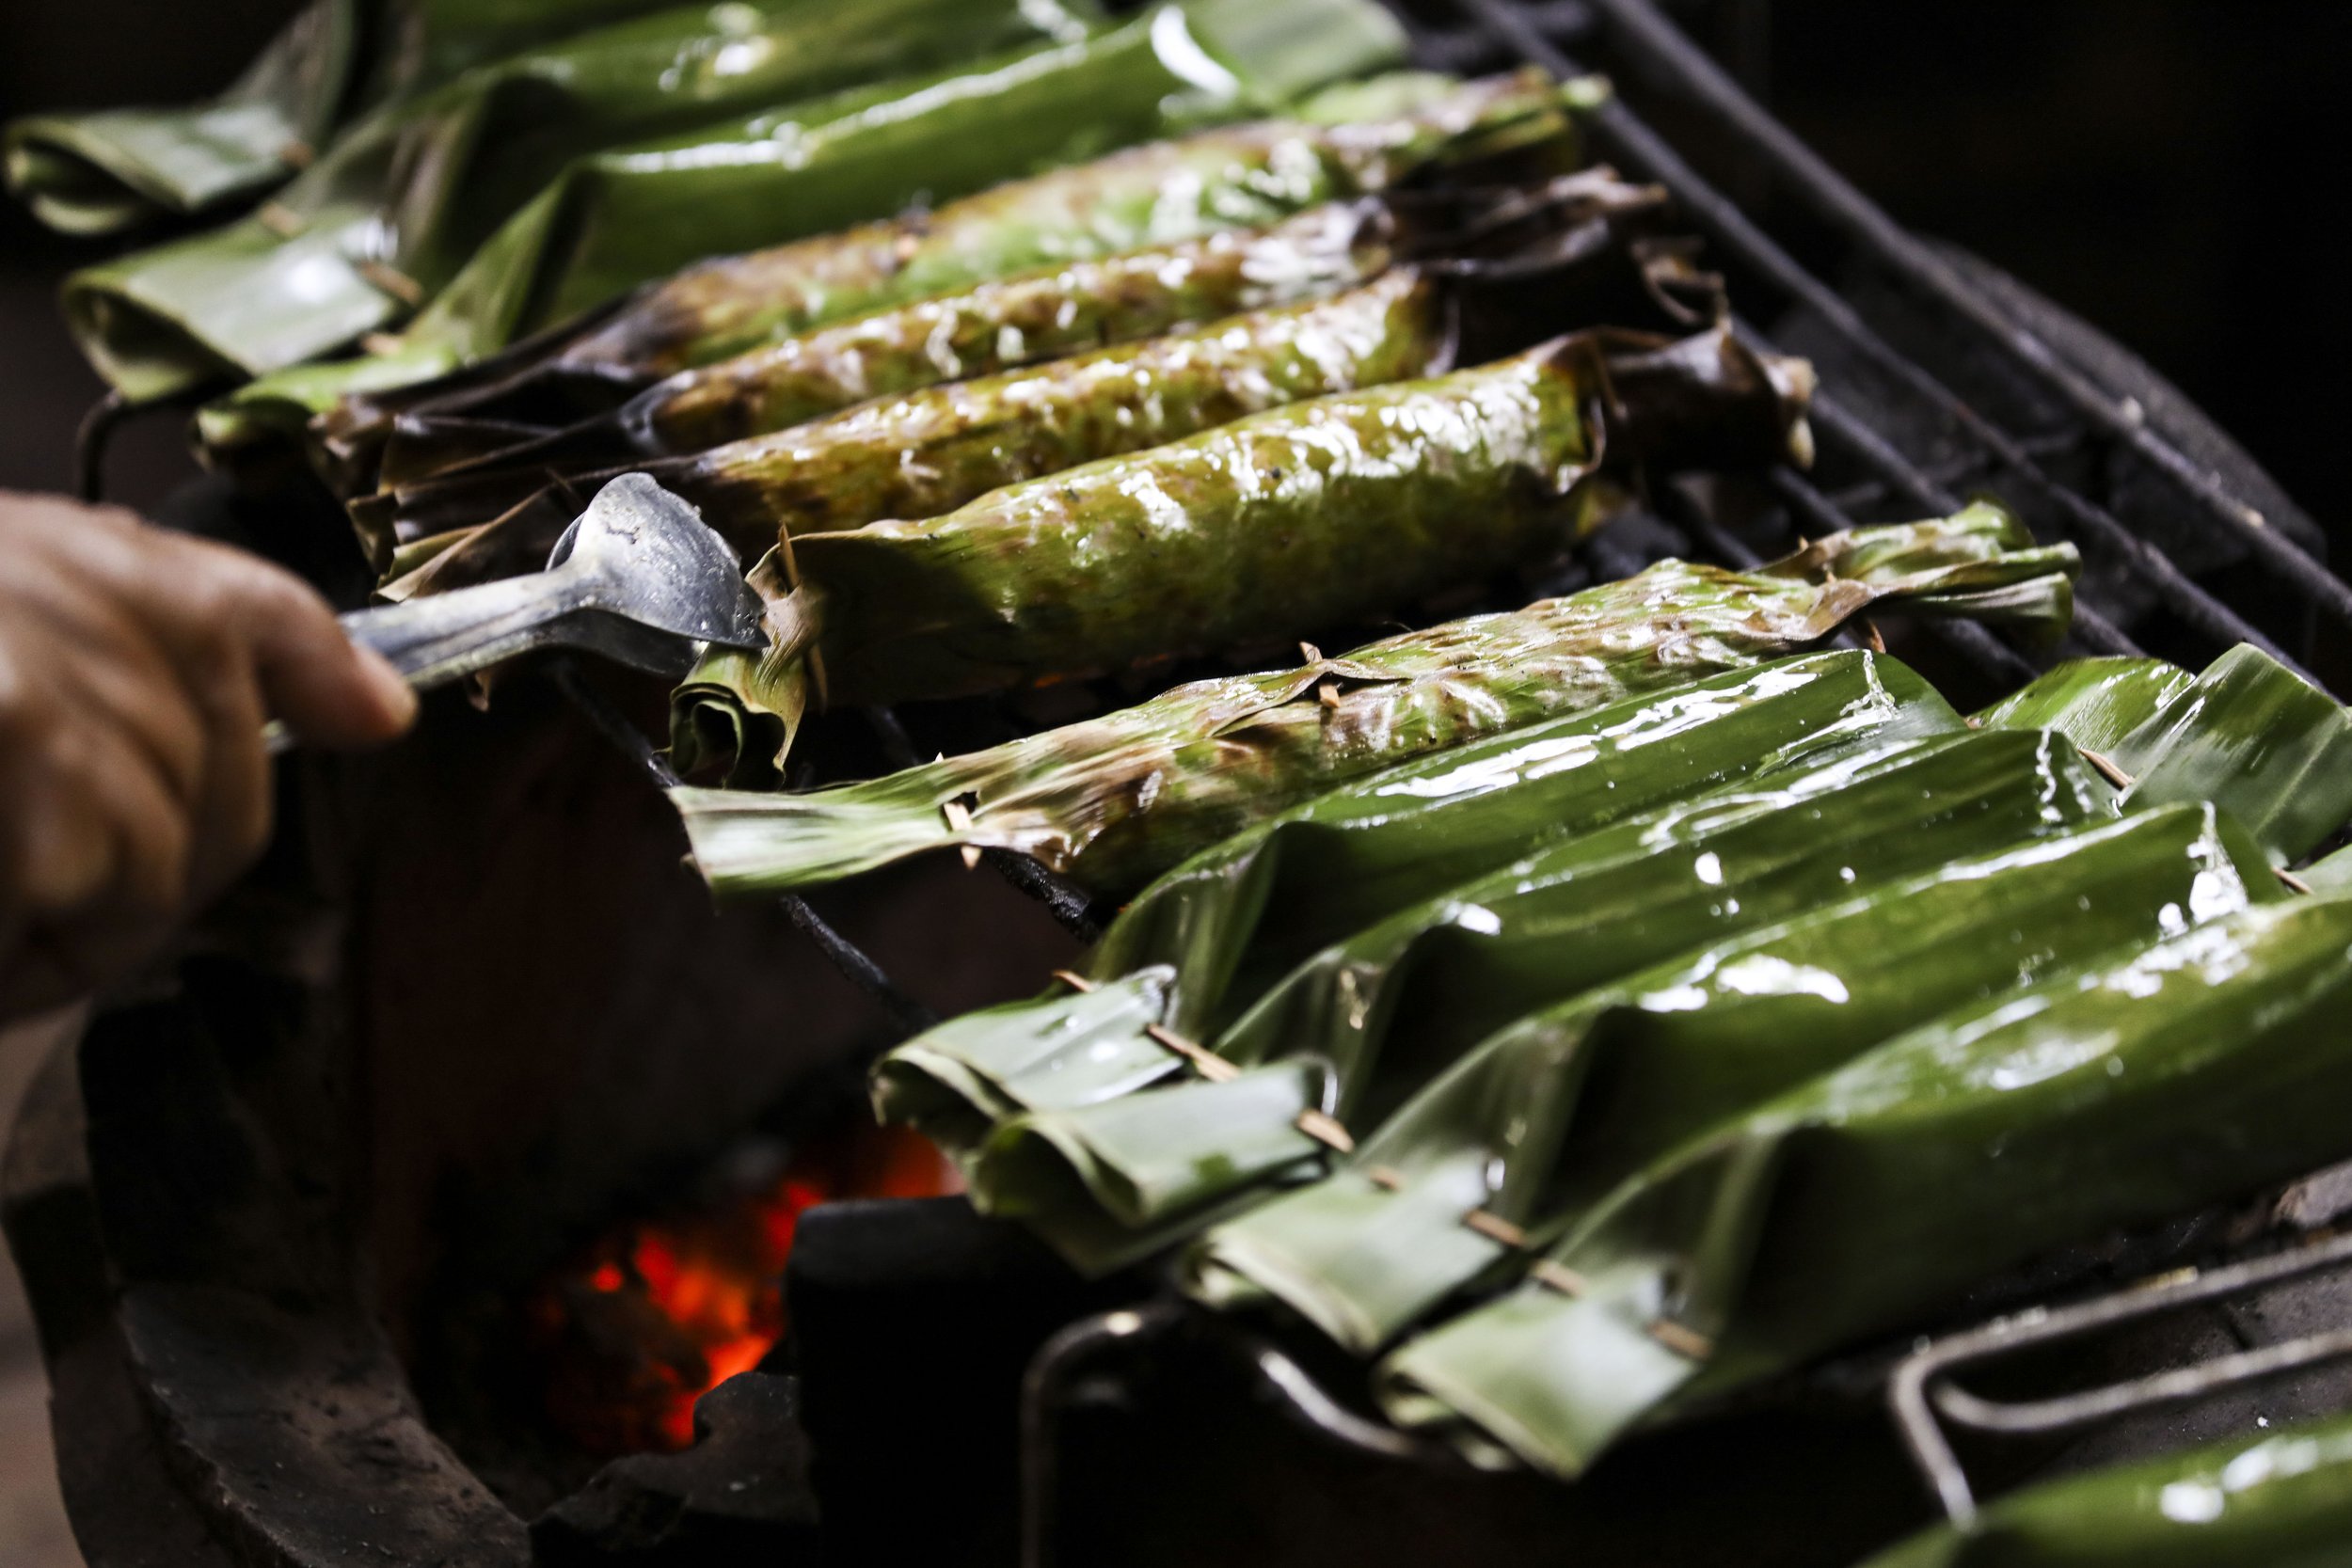  Sticky rice grilled in bamboo leaves in Koh Yao Noi, Thailand on Wednesday, April 20, 2022.  